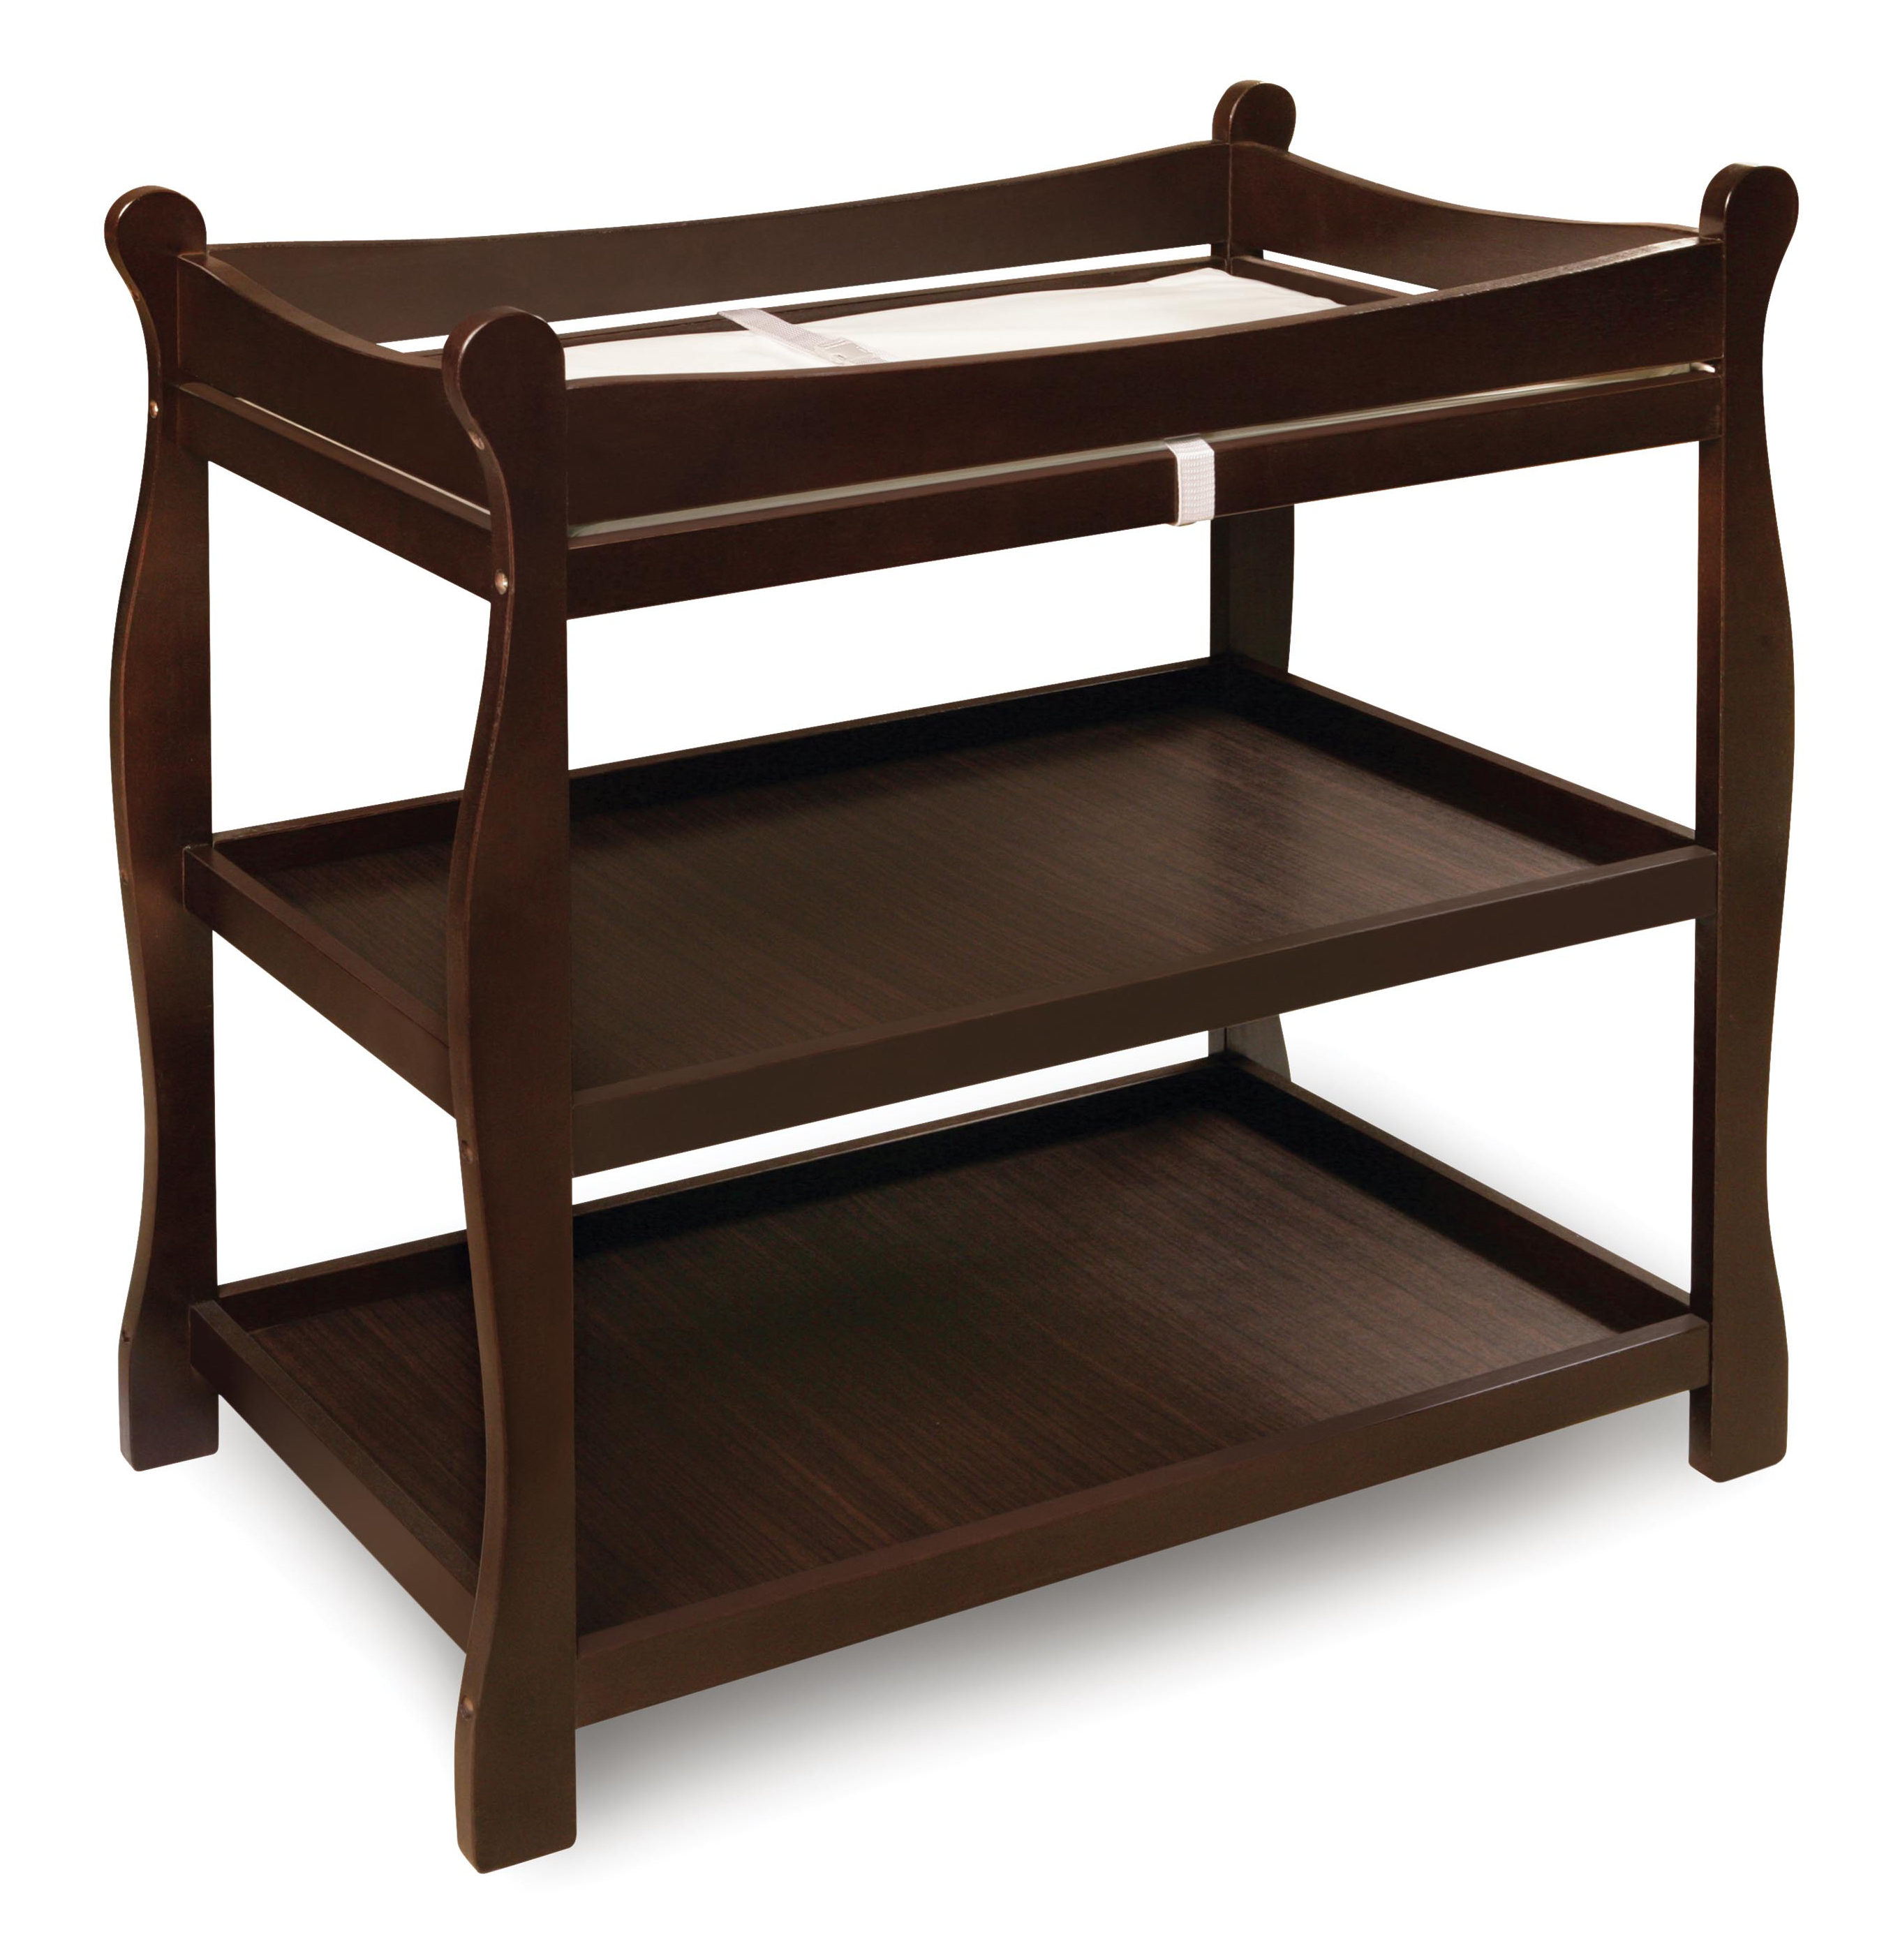 Sleigh Style Baby Changing Table - Espresso